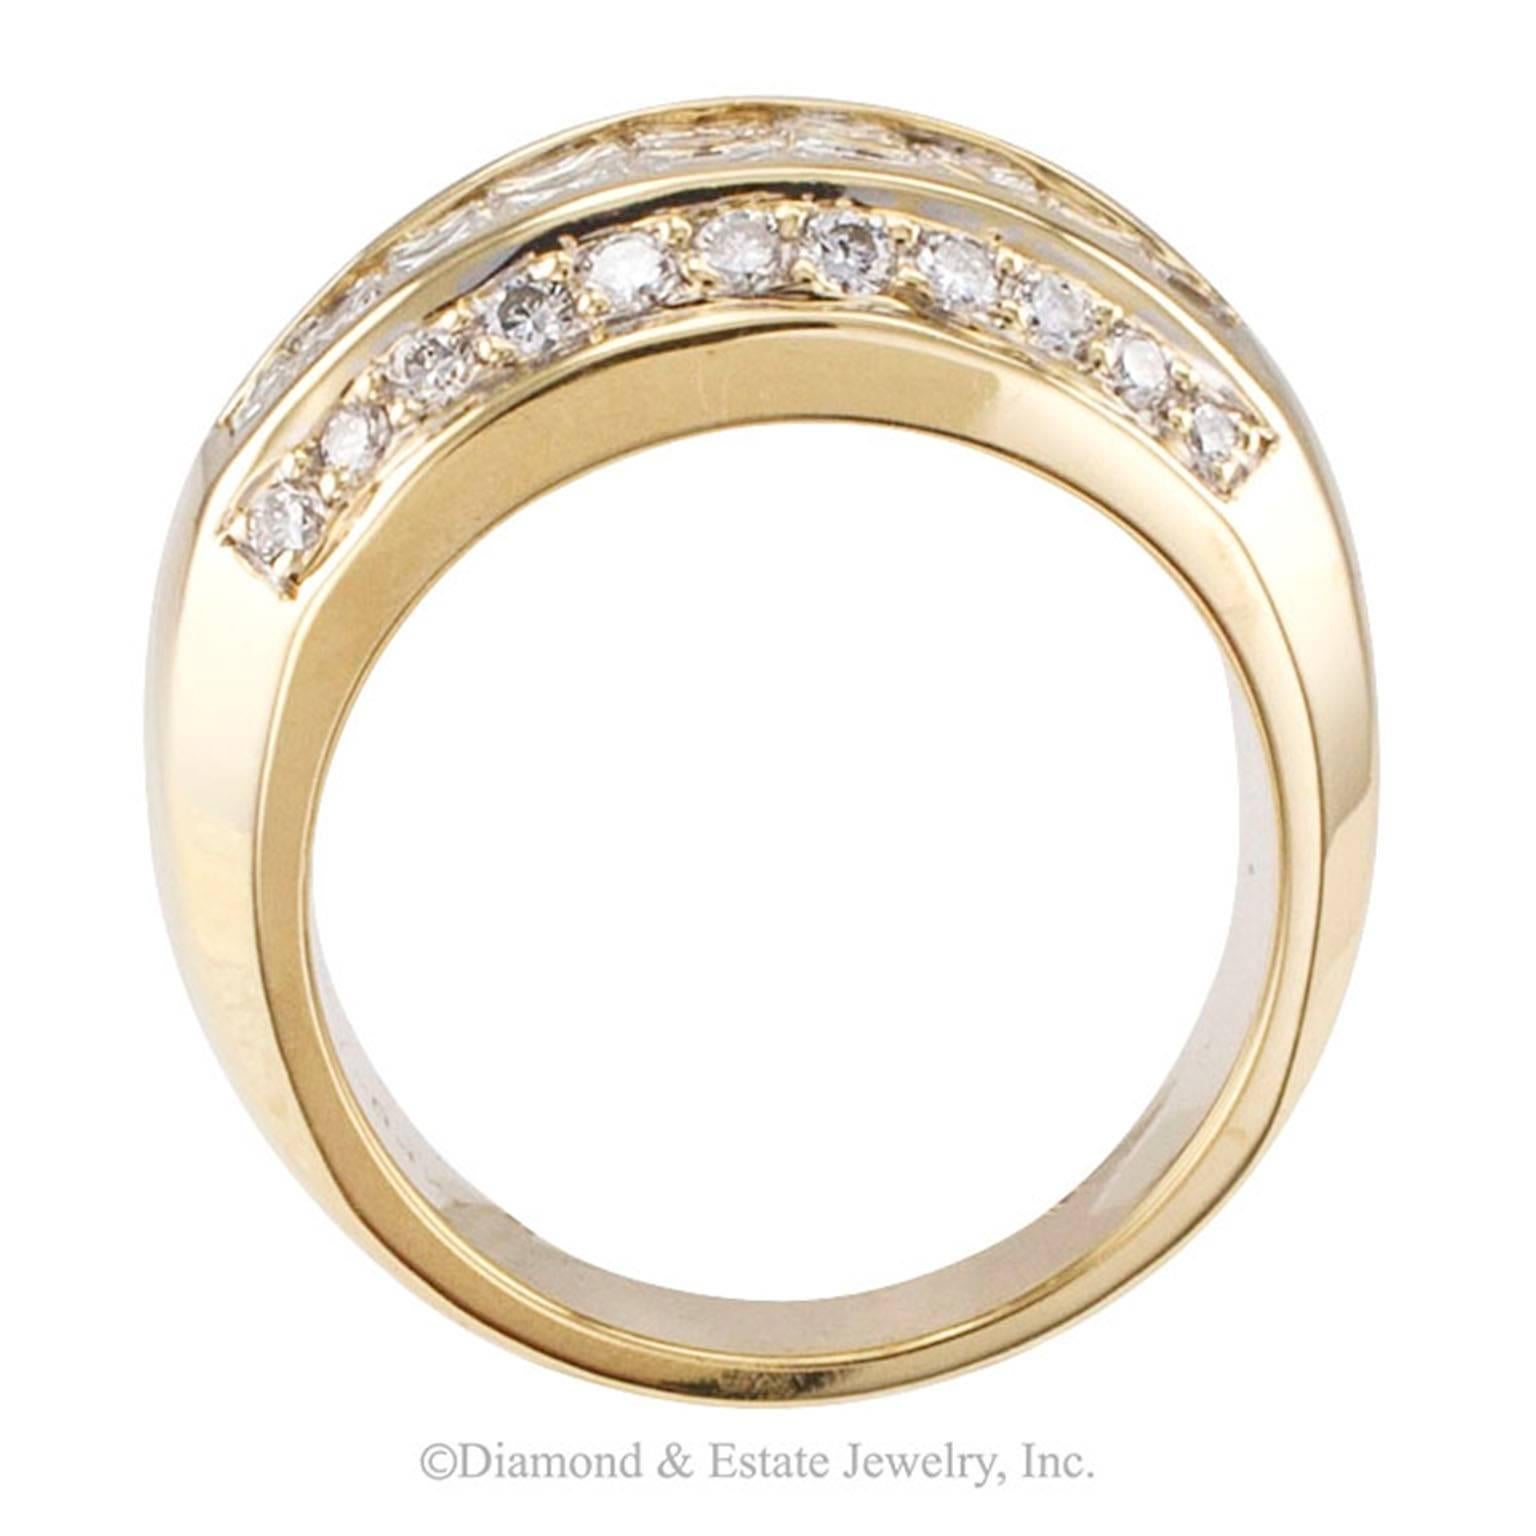 Wide Princess Cut Diamond Yellow Gold Band

Wide wedding band with invisibly-set princess cut diamonds mounted in 18-karat yellow gold, circa 1990.  The upper side of the design features three rows of invisibly set princess-cut diamonds, between